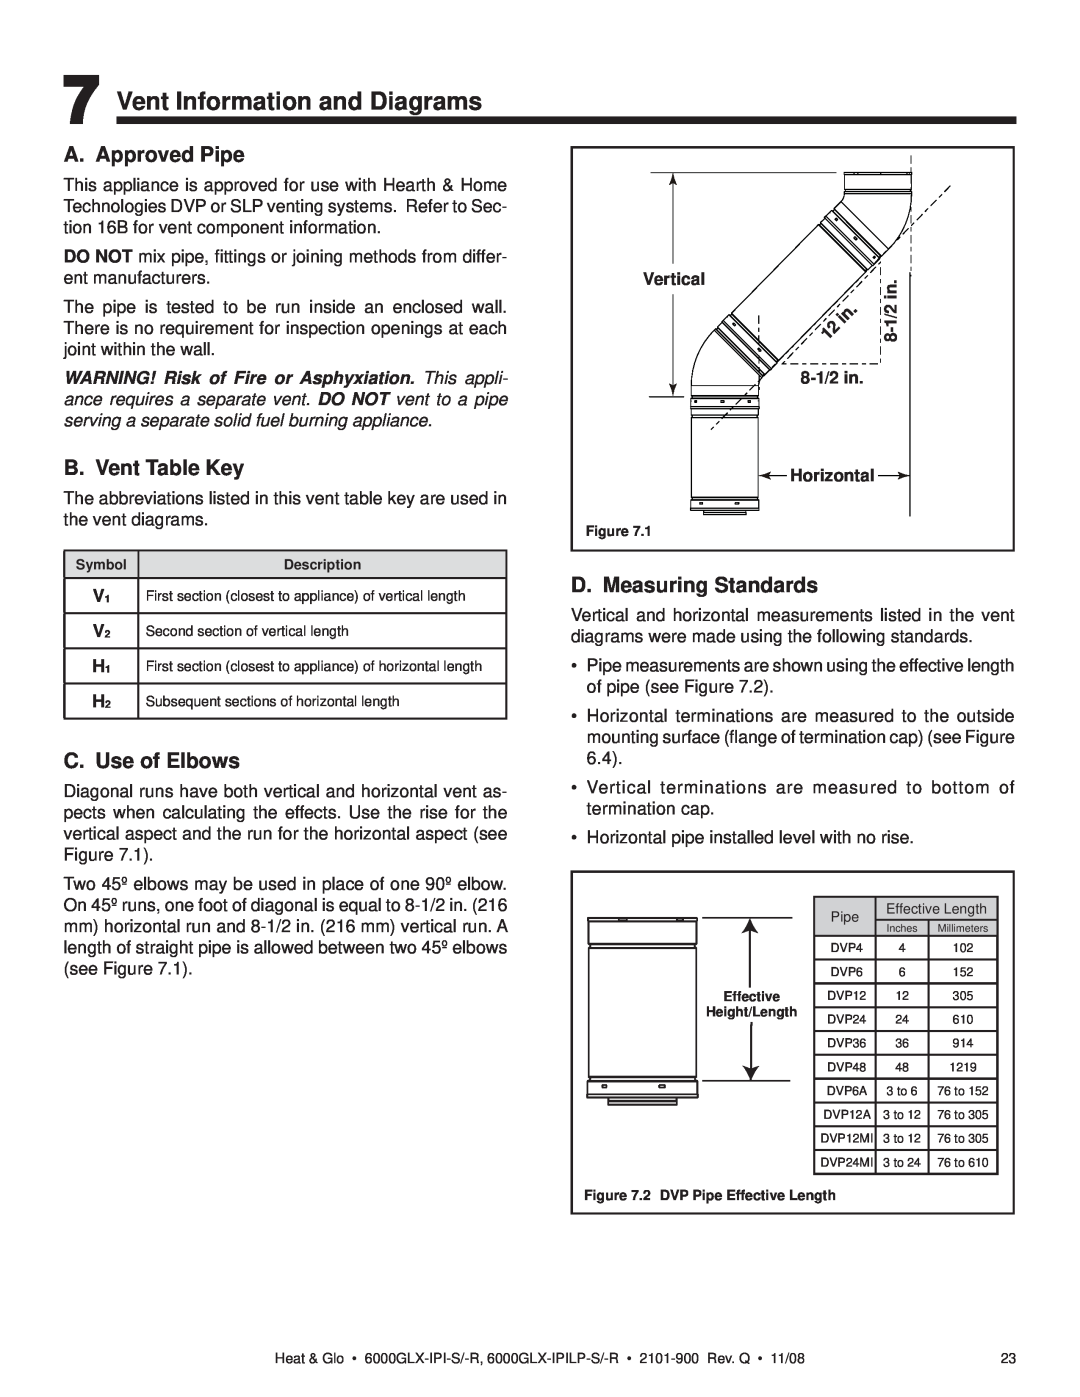 Heat & Glo LifeStyle 6000GLX-IPILP-S/-R owner manual Vent Information and Diagrams, A. Approved Pipe, B. Vent Table Key 